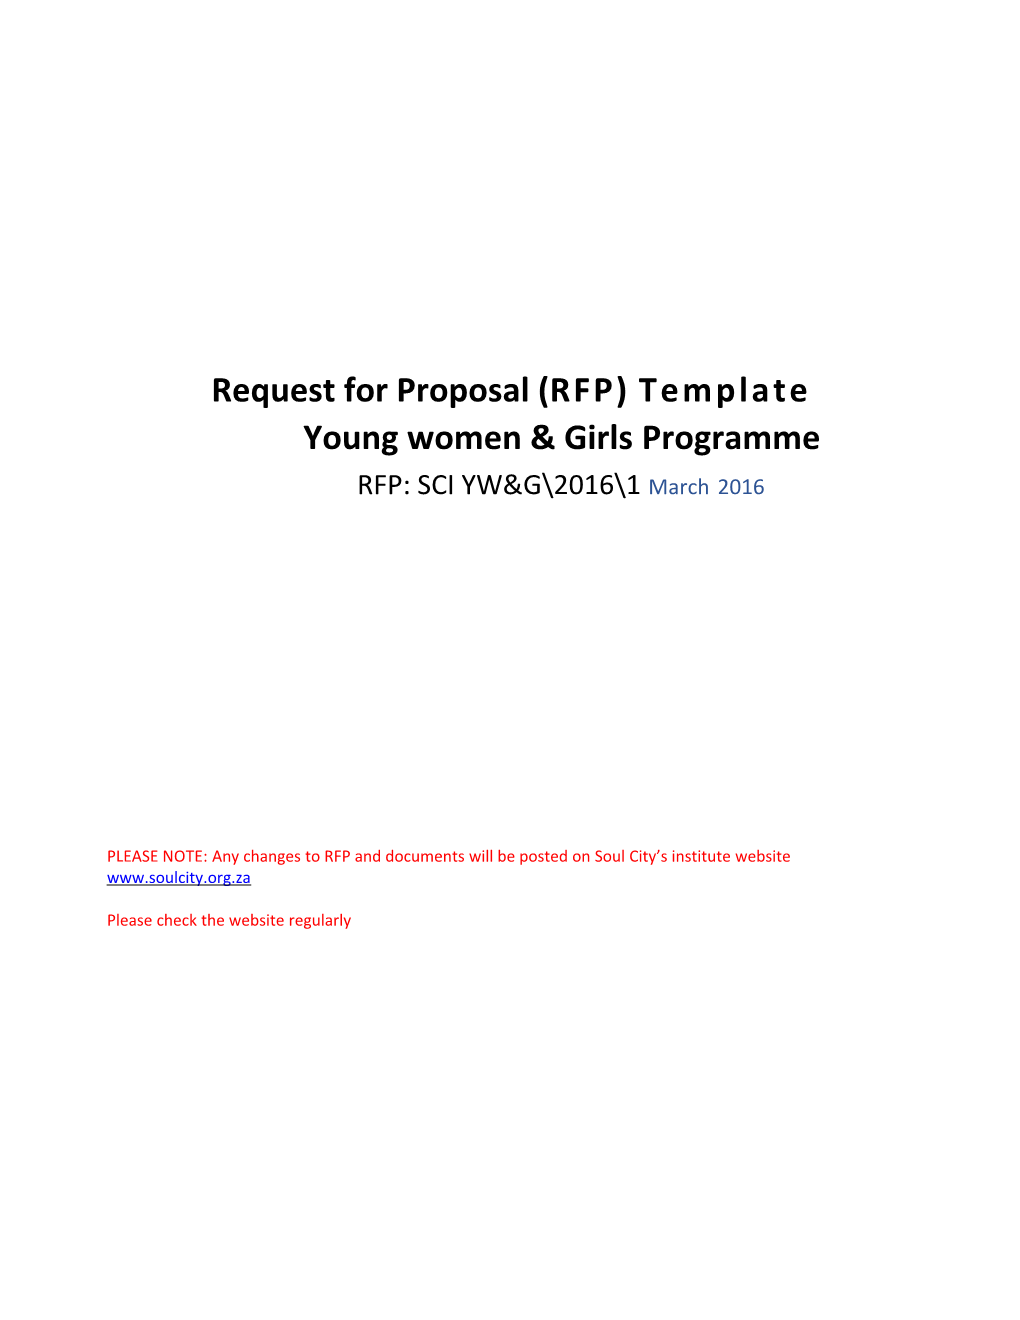 Request for Proposal (RFP)Template Young Women & Girlsprogramme